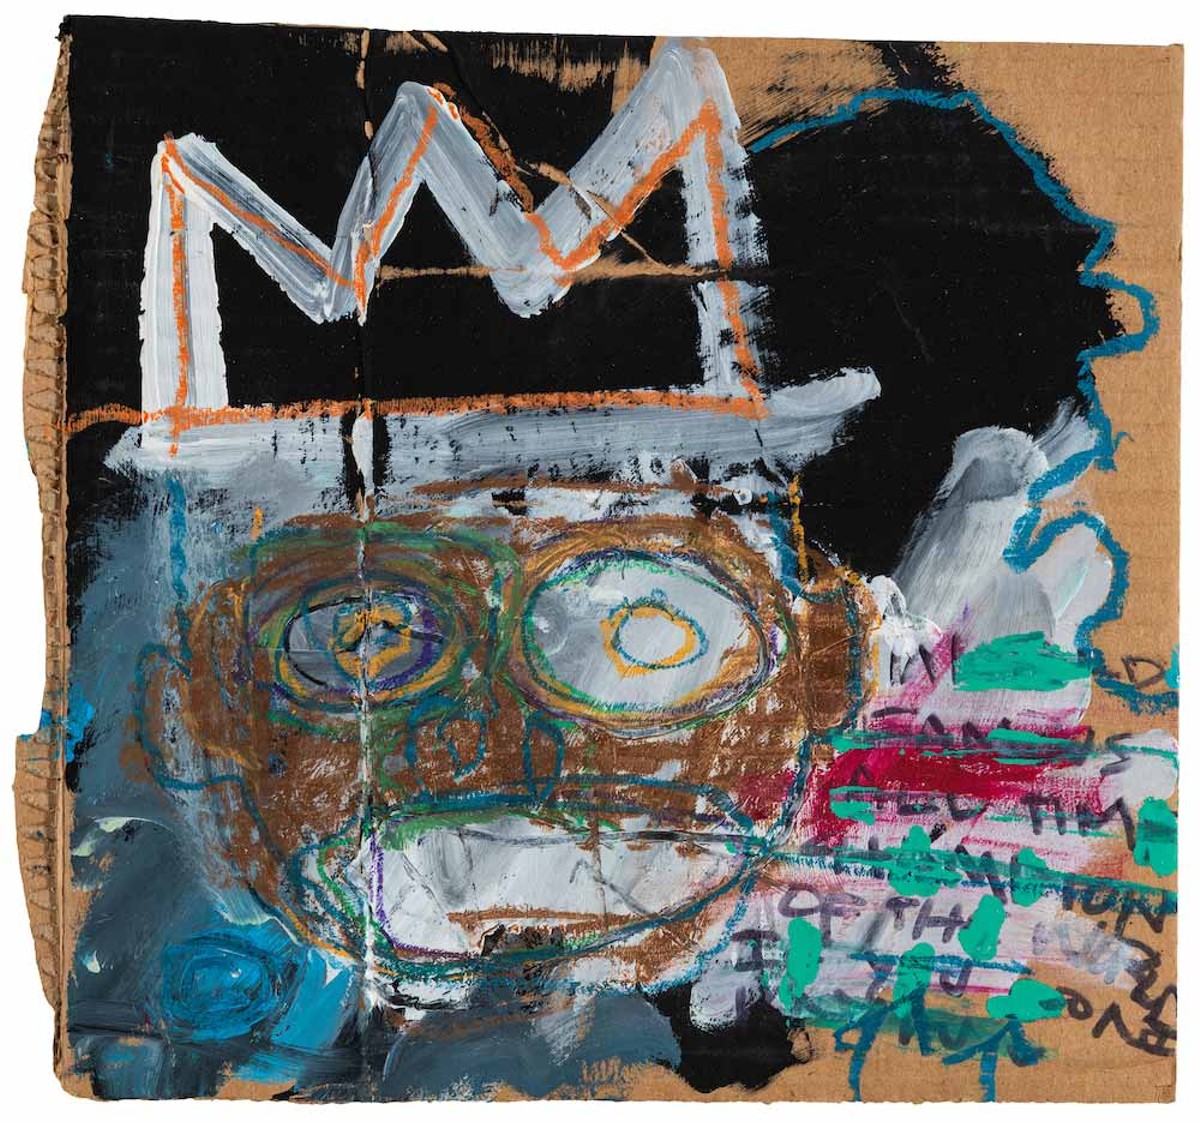 “Untitled (Self-Portrait or Crown Face II)” attributed to Jean-Michel Basquiat/1982. (image courtesy Orlando Museum of Art)